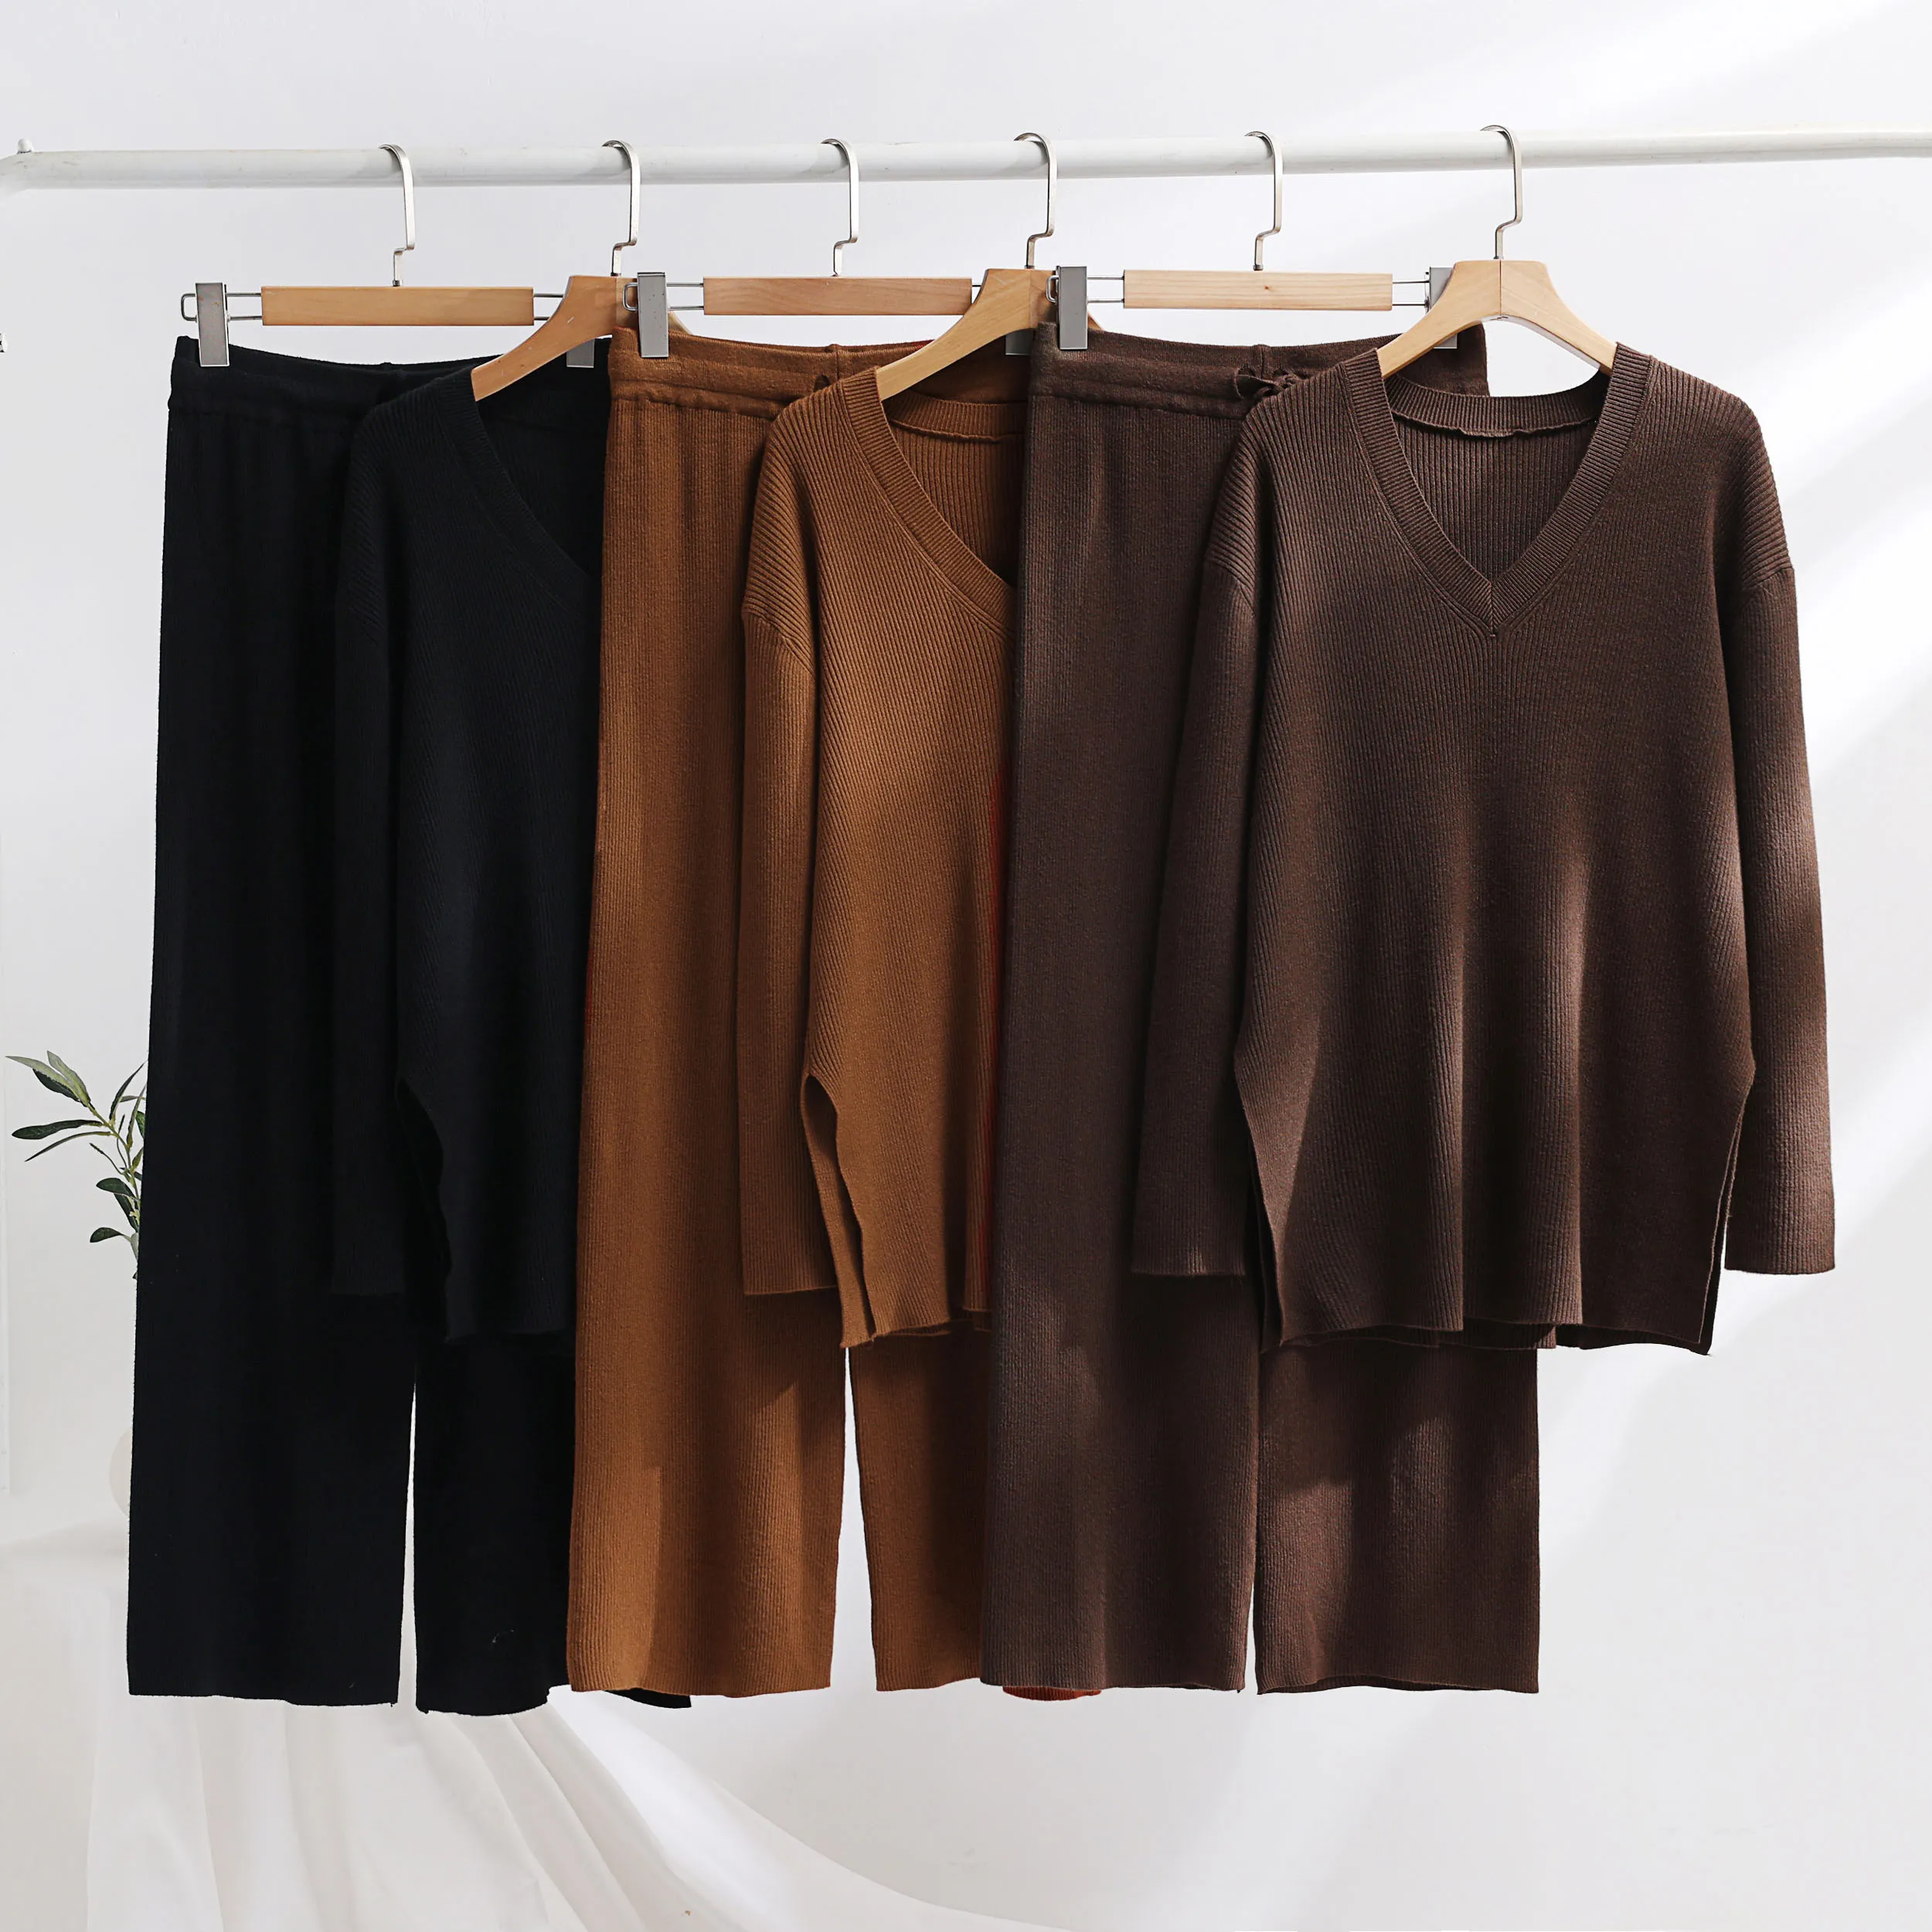 Core spun yarn thickened warm home clothing knitted suit for foreign trade sweater loose autumn/winter pullover+wide leg pants